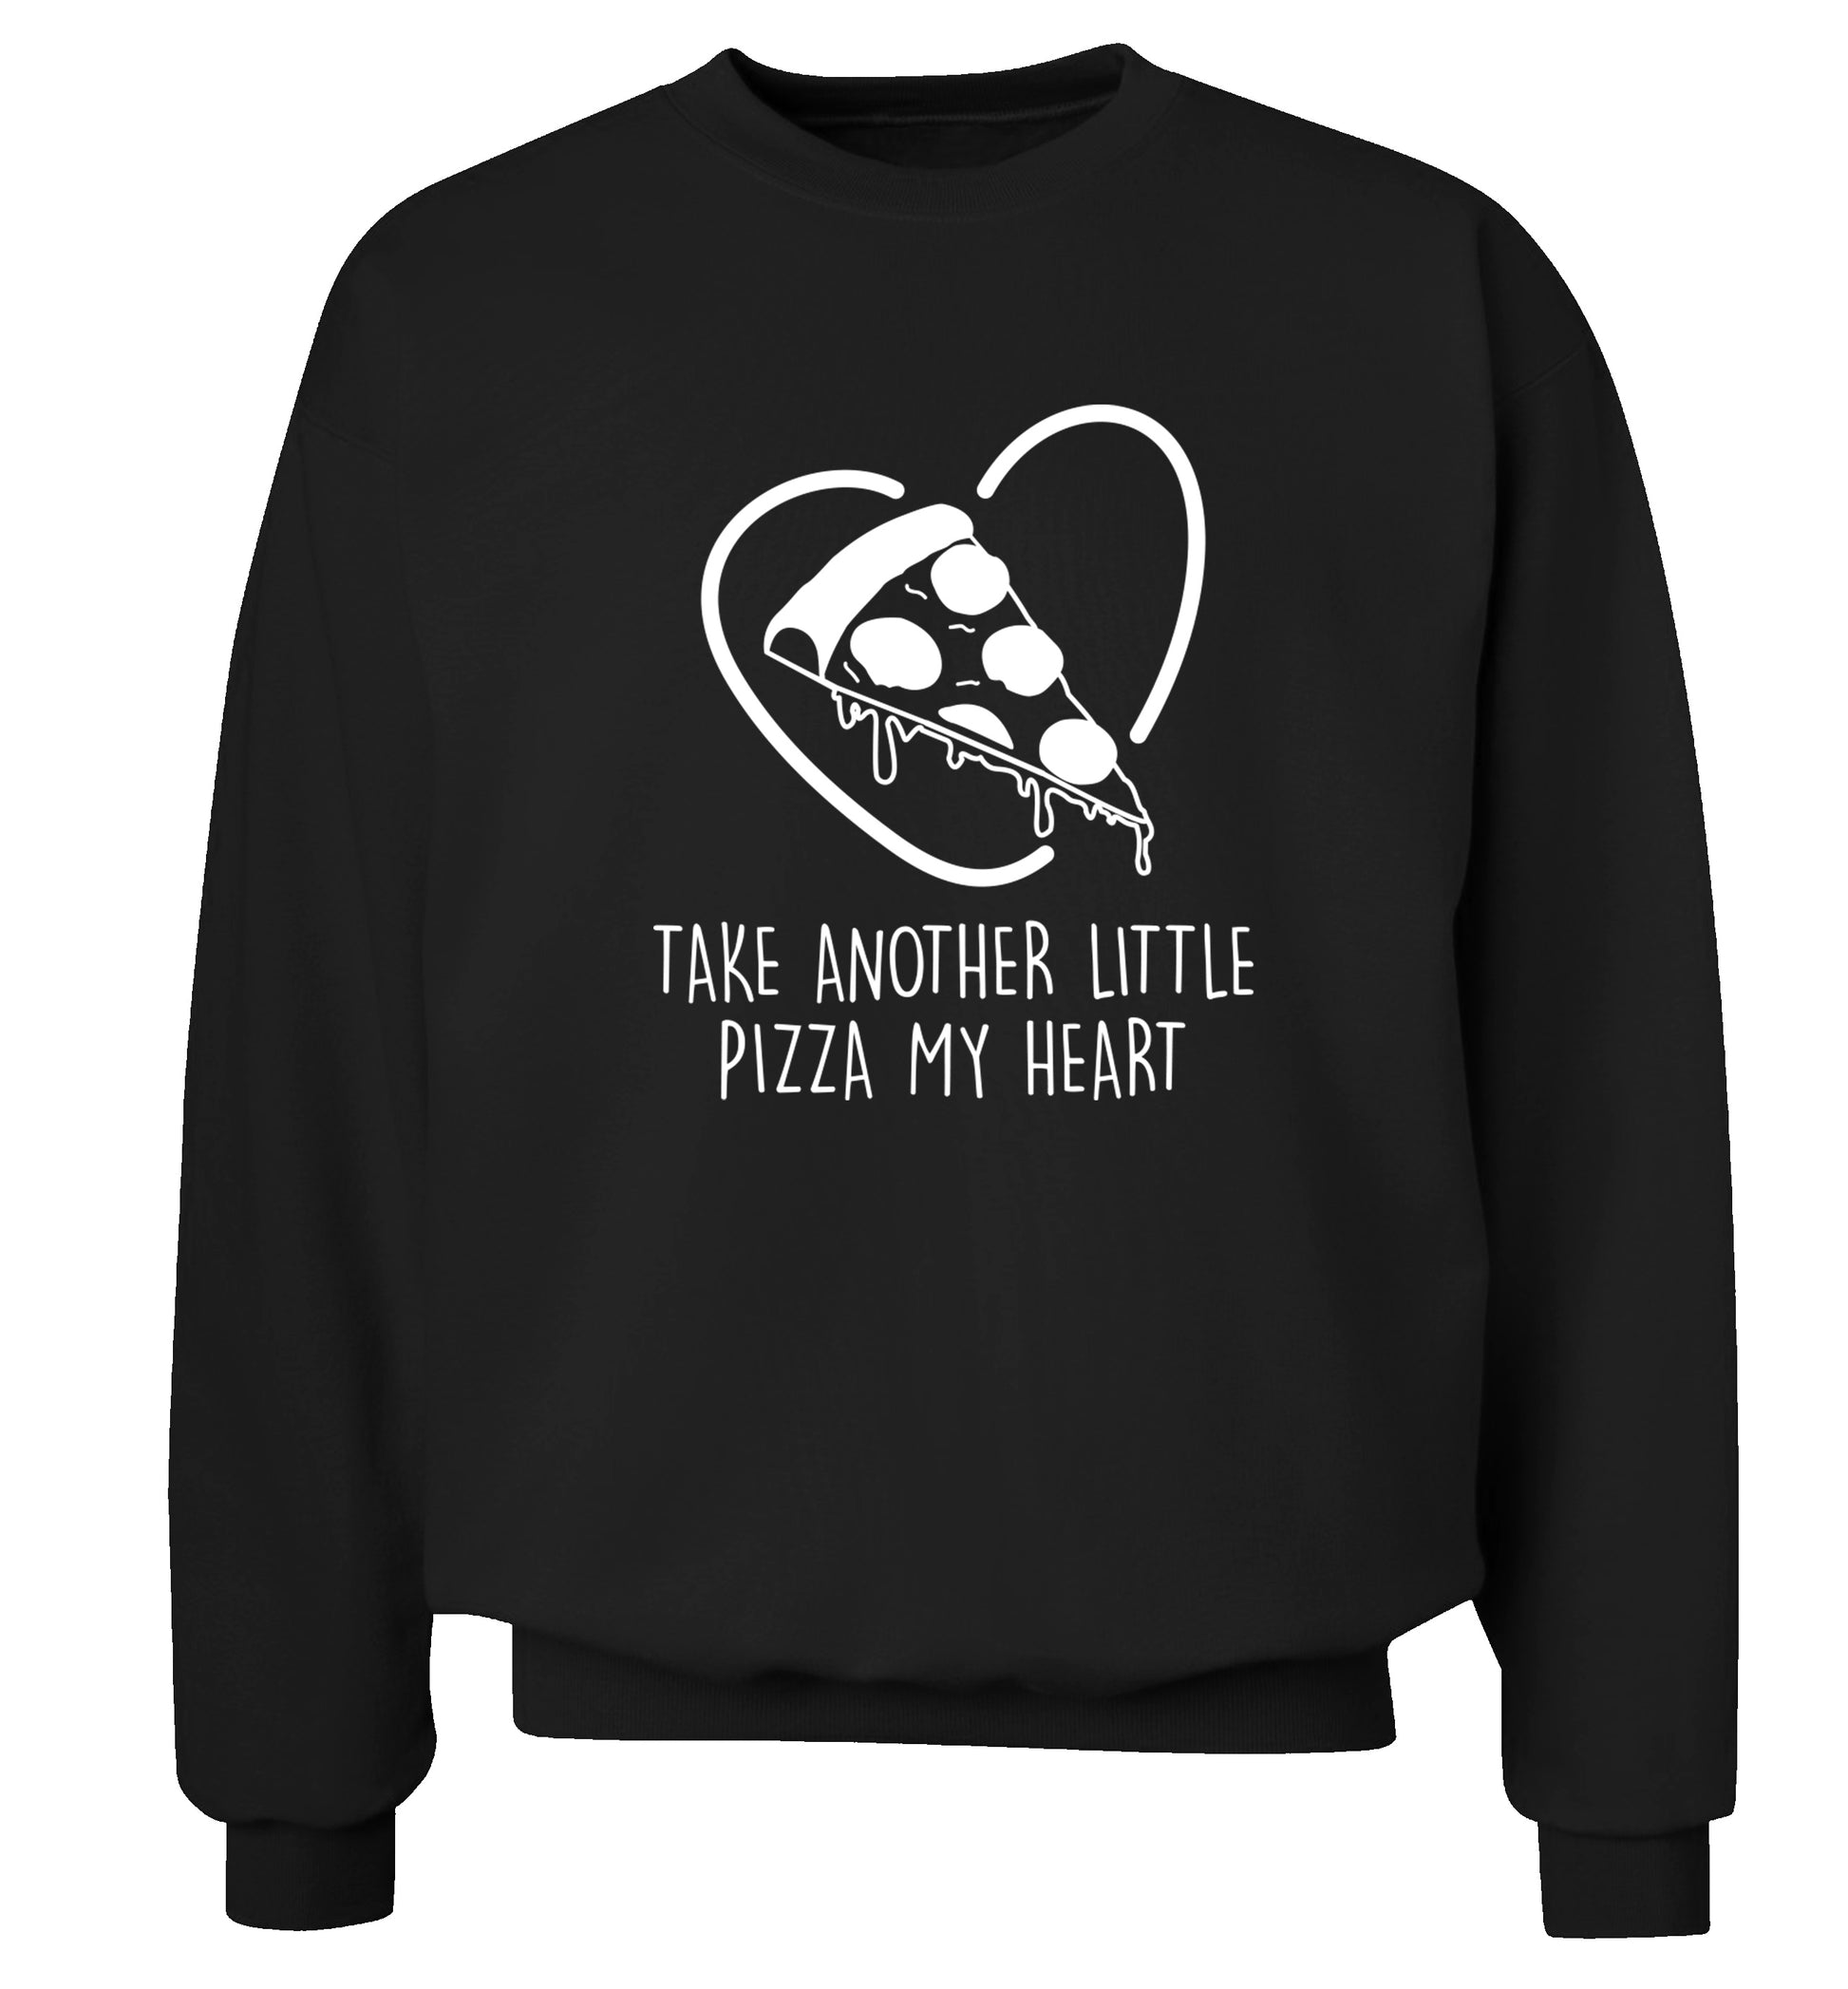 Take another little pizza my heart Adult's unisex black Sweater 2XL